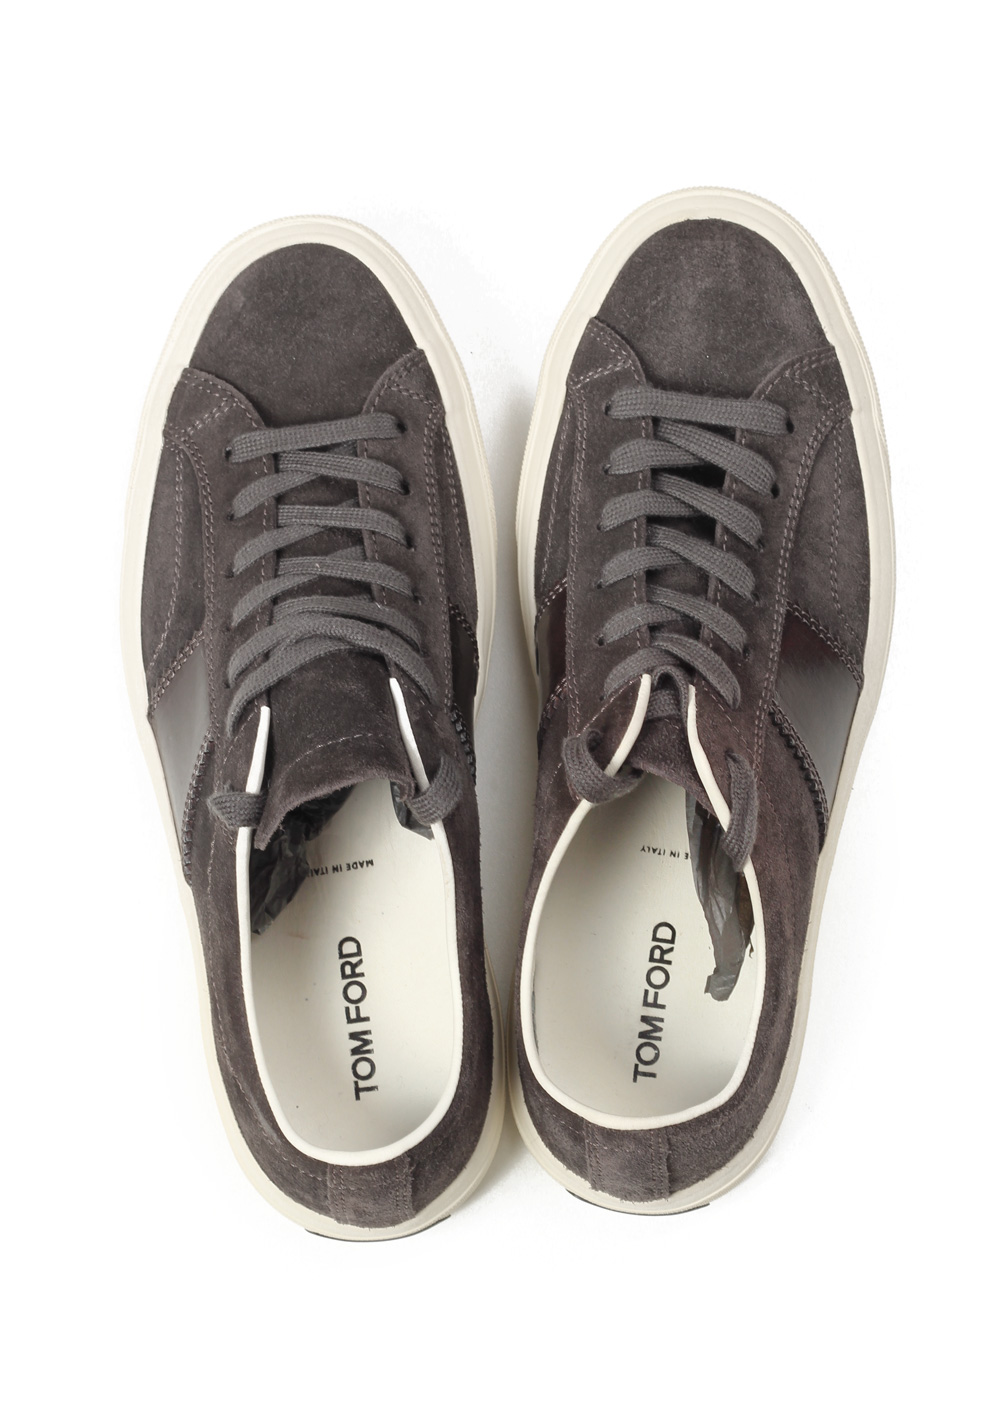 TOM FORD Cambridge Lace Up Dark Gray Suede Sneaker Shoes Size 8 UK / 9 U.S. | Costume Limité